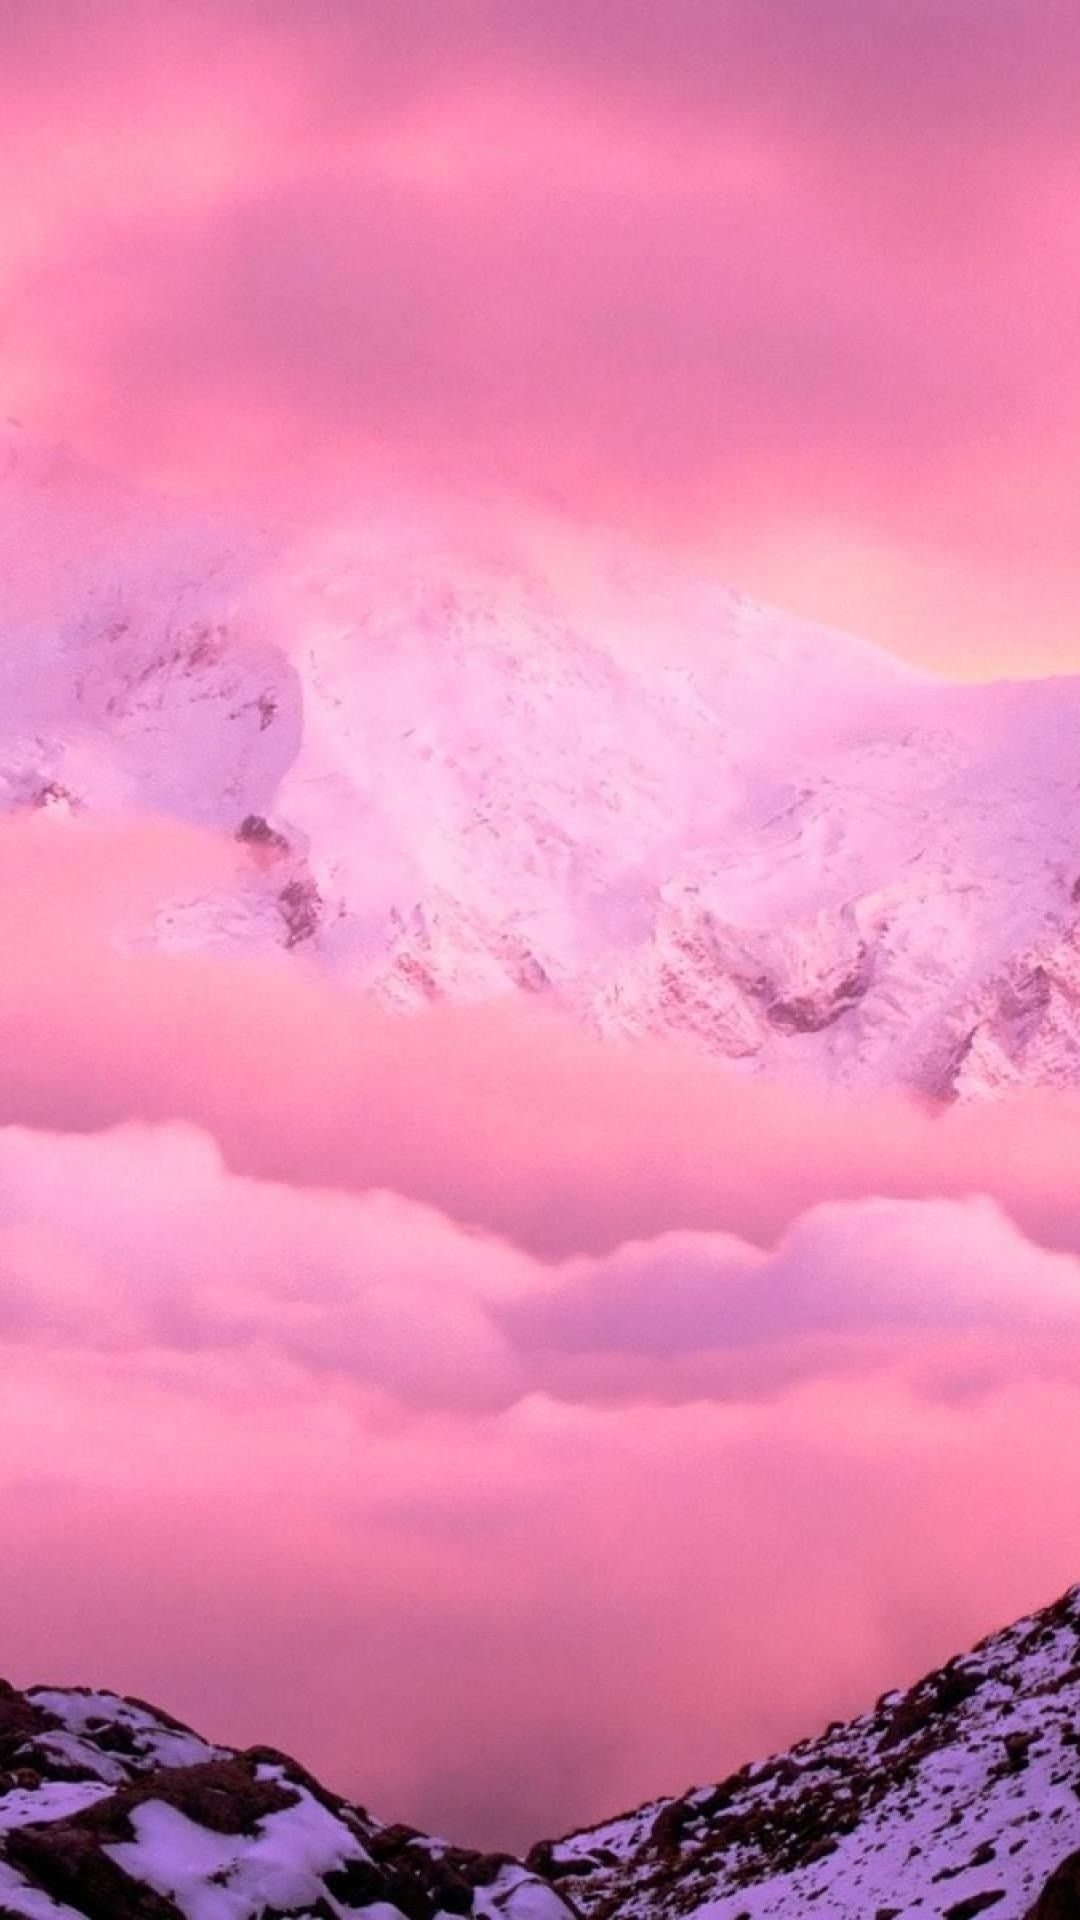 Wallpaper For iPhone Tumblr Pink New Landscape iPhone X